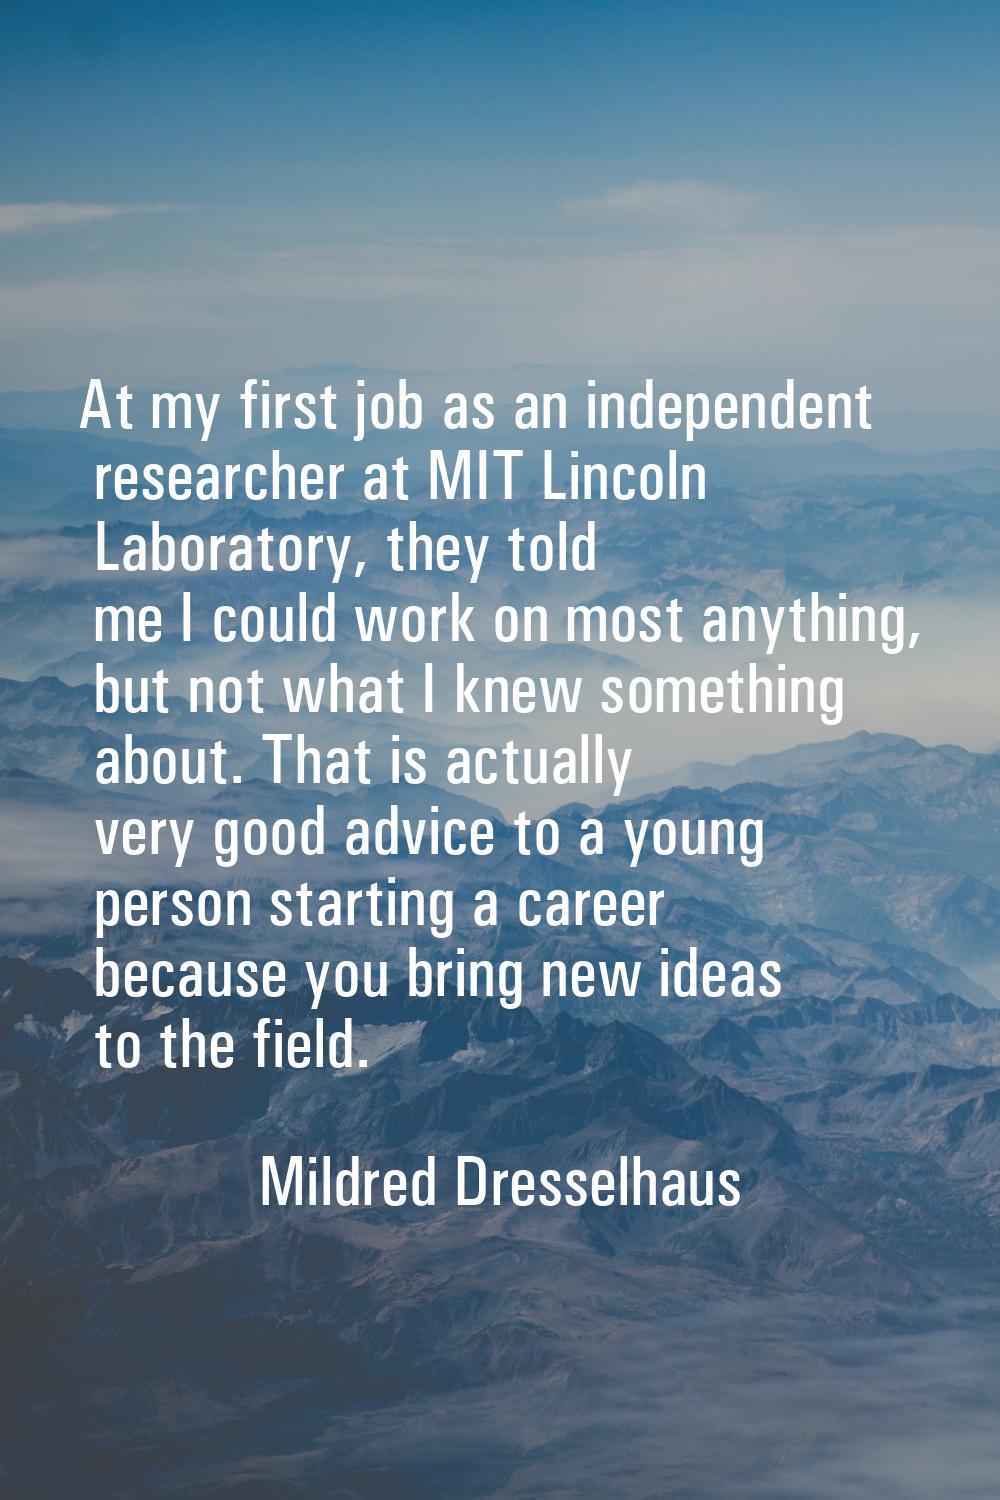 At my first job as an independent researcher at MIT Lincoln Laboratory, they told me I could work o